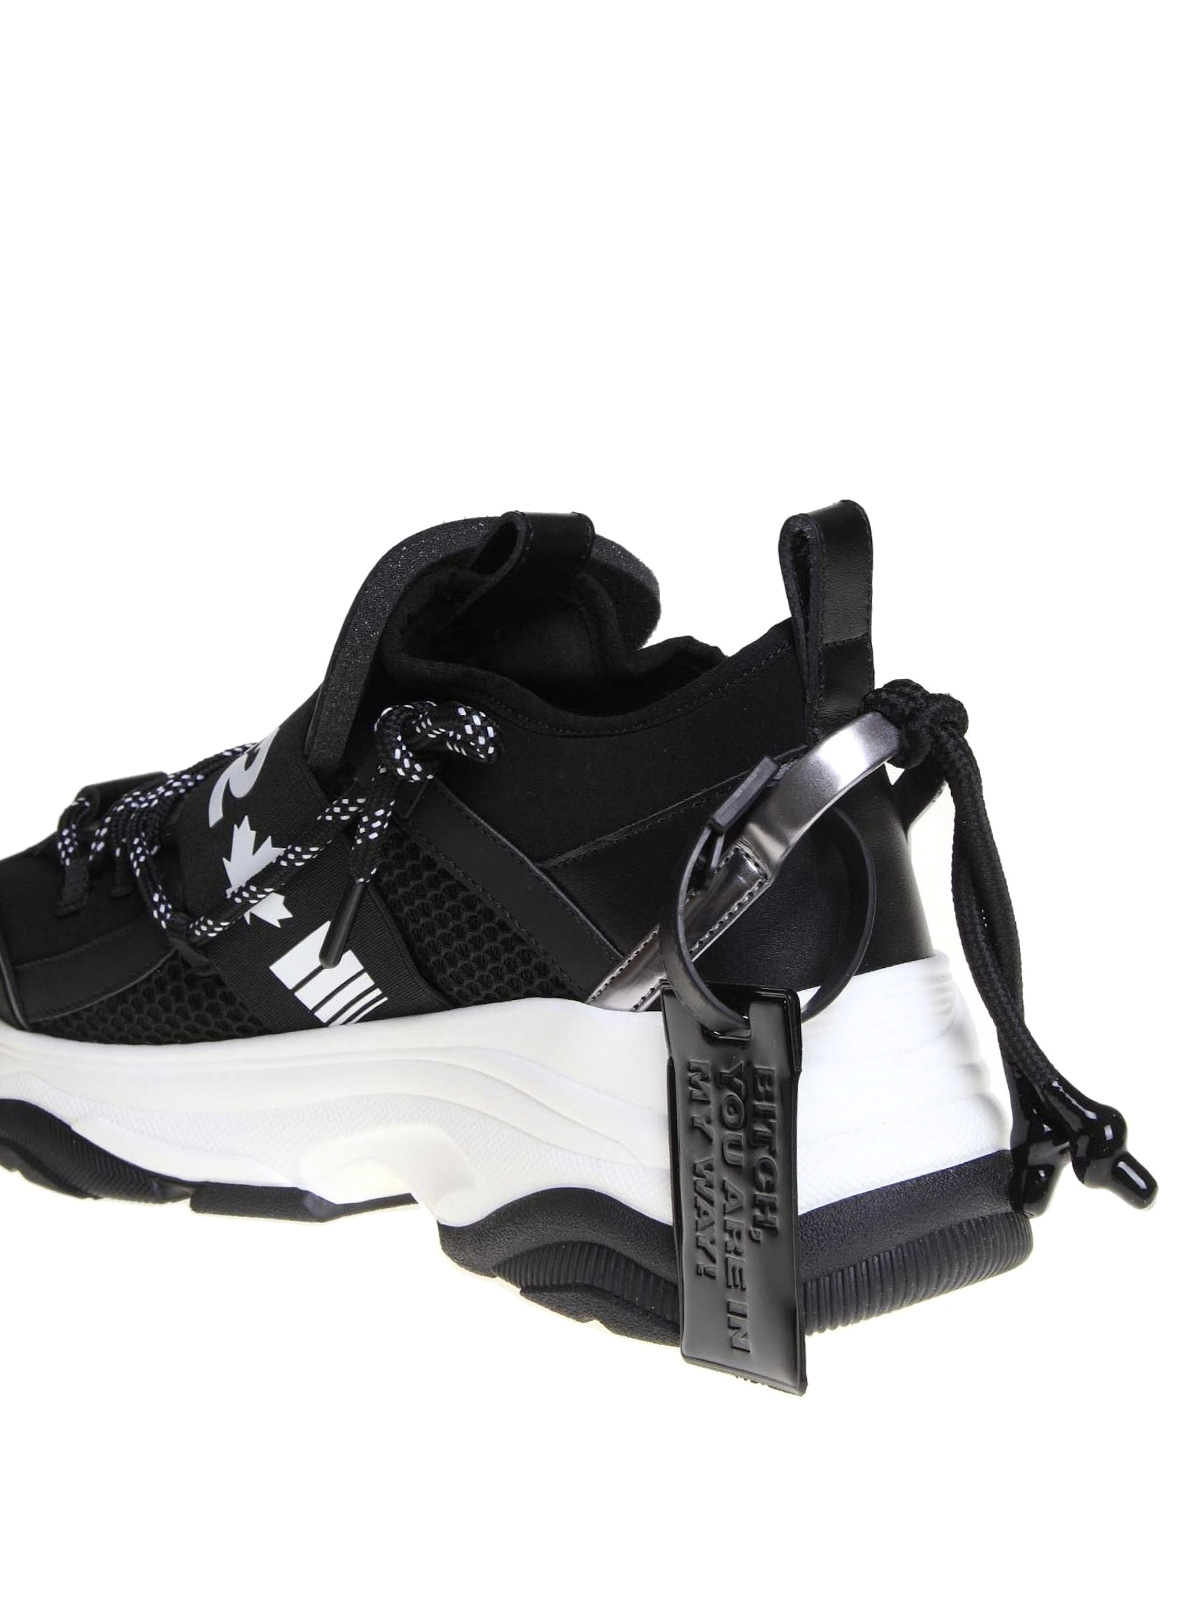 Omkleden Hollywood pols Trainers Dsquared2 - D-bumpy black sneakers - SNM00481680M063 | iKRIX.com